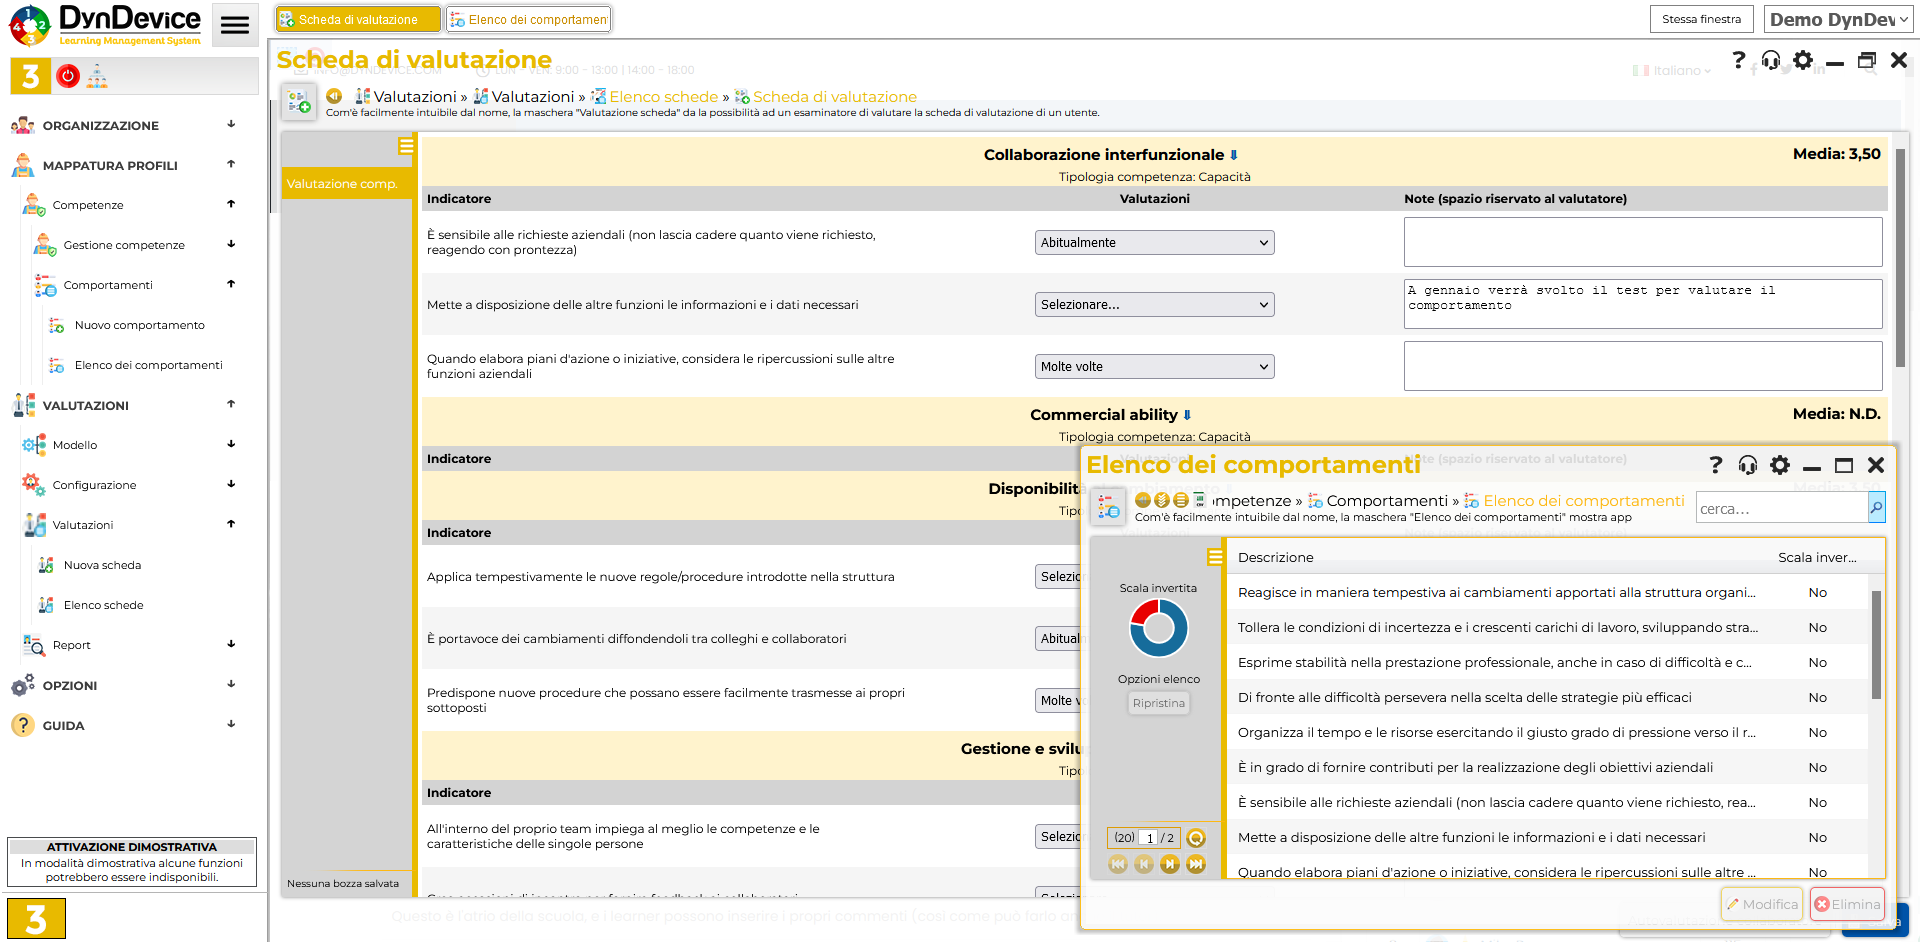 Panoramica del management assessment tool di DynDevice